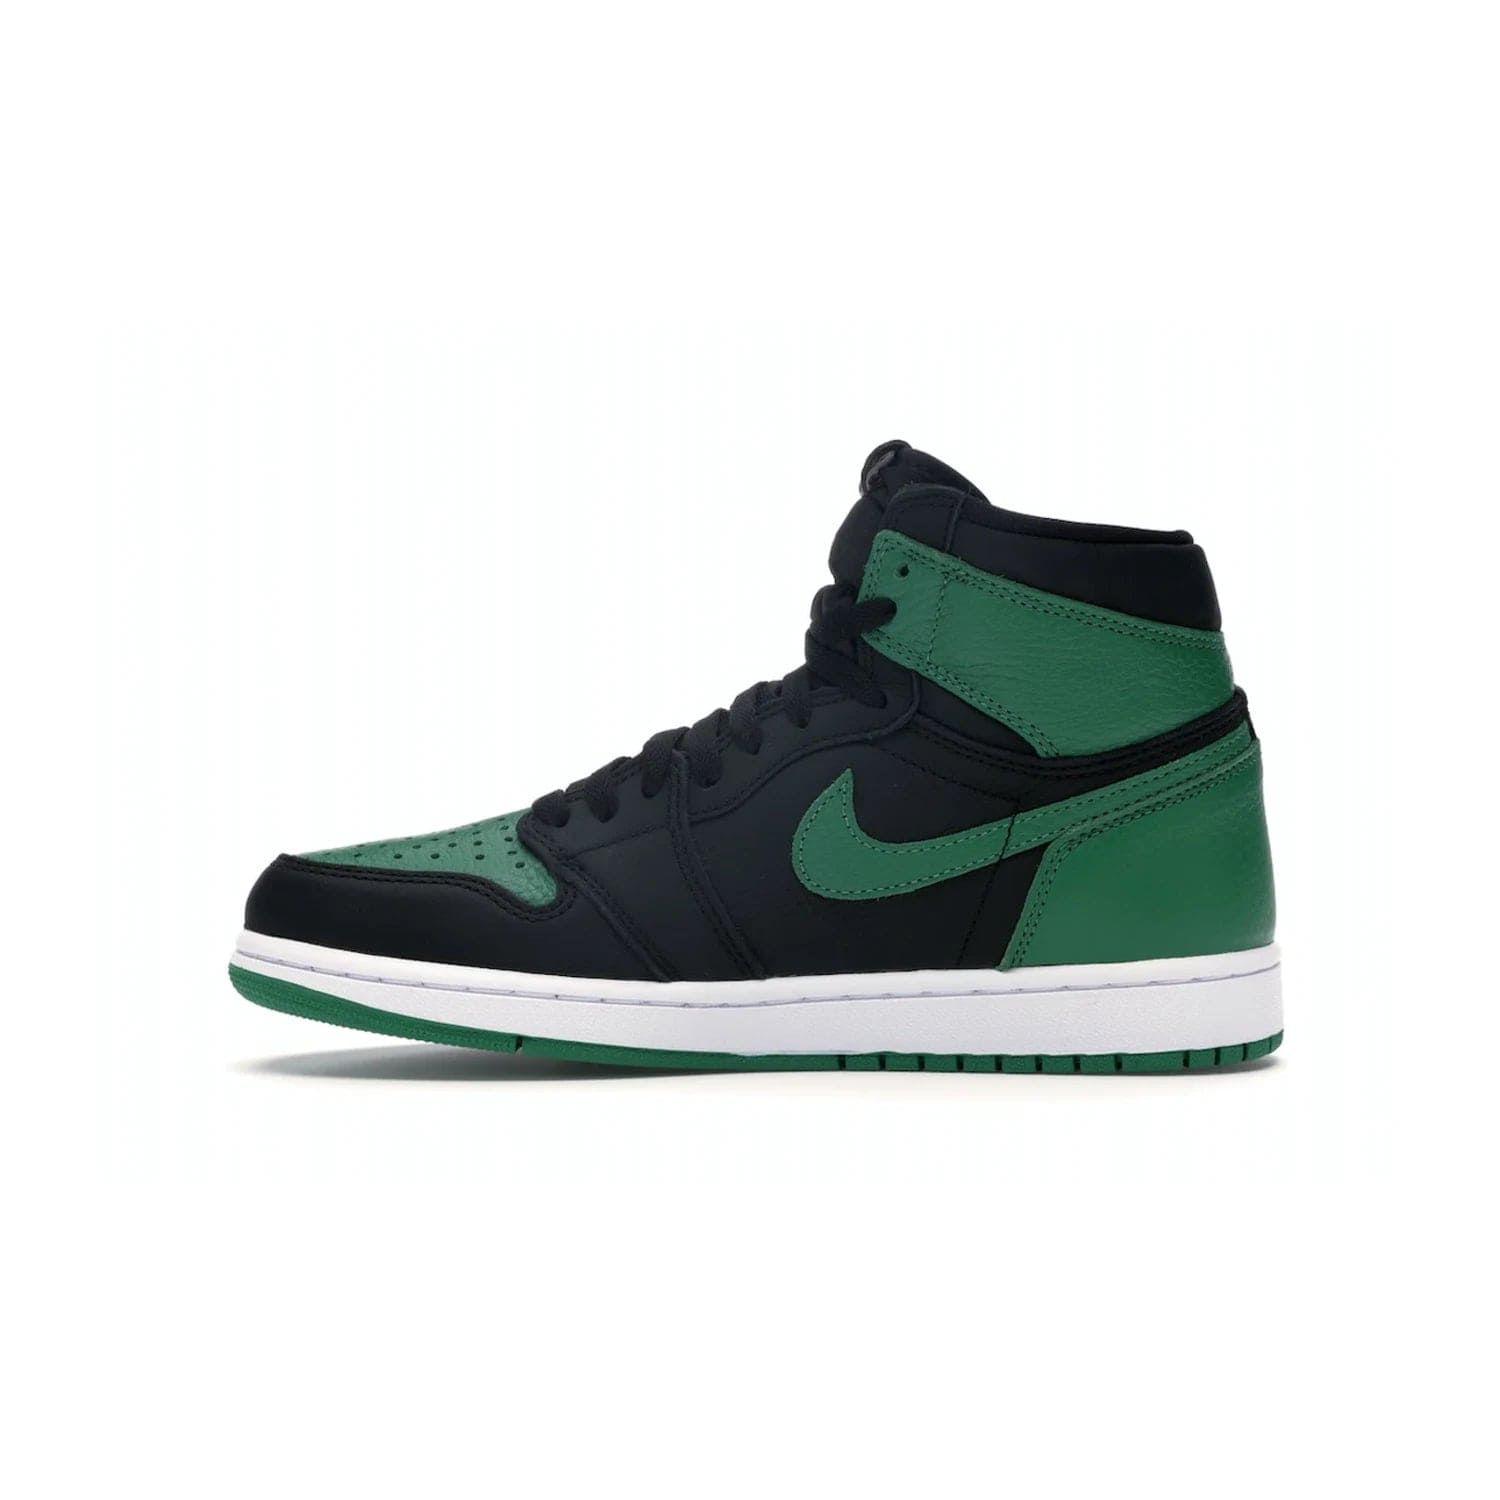 Jordan 1 Retro High Pine Green Black - Image 19 - Only at www.BallersClubKickz.com - Step into fresh style with the Jordan 1 Retro High Pine Green Black. Combining a black tumbled leather upper with green leather overlays, this sneaker features a Gym Red embroidered tongue tag, sail midsole, and pine green outsole for iconic style with a unique twist.